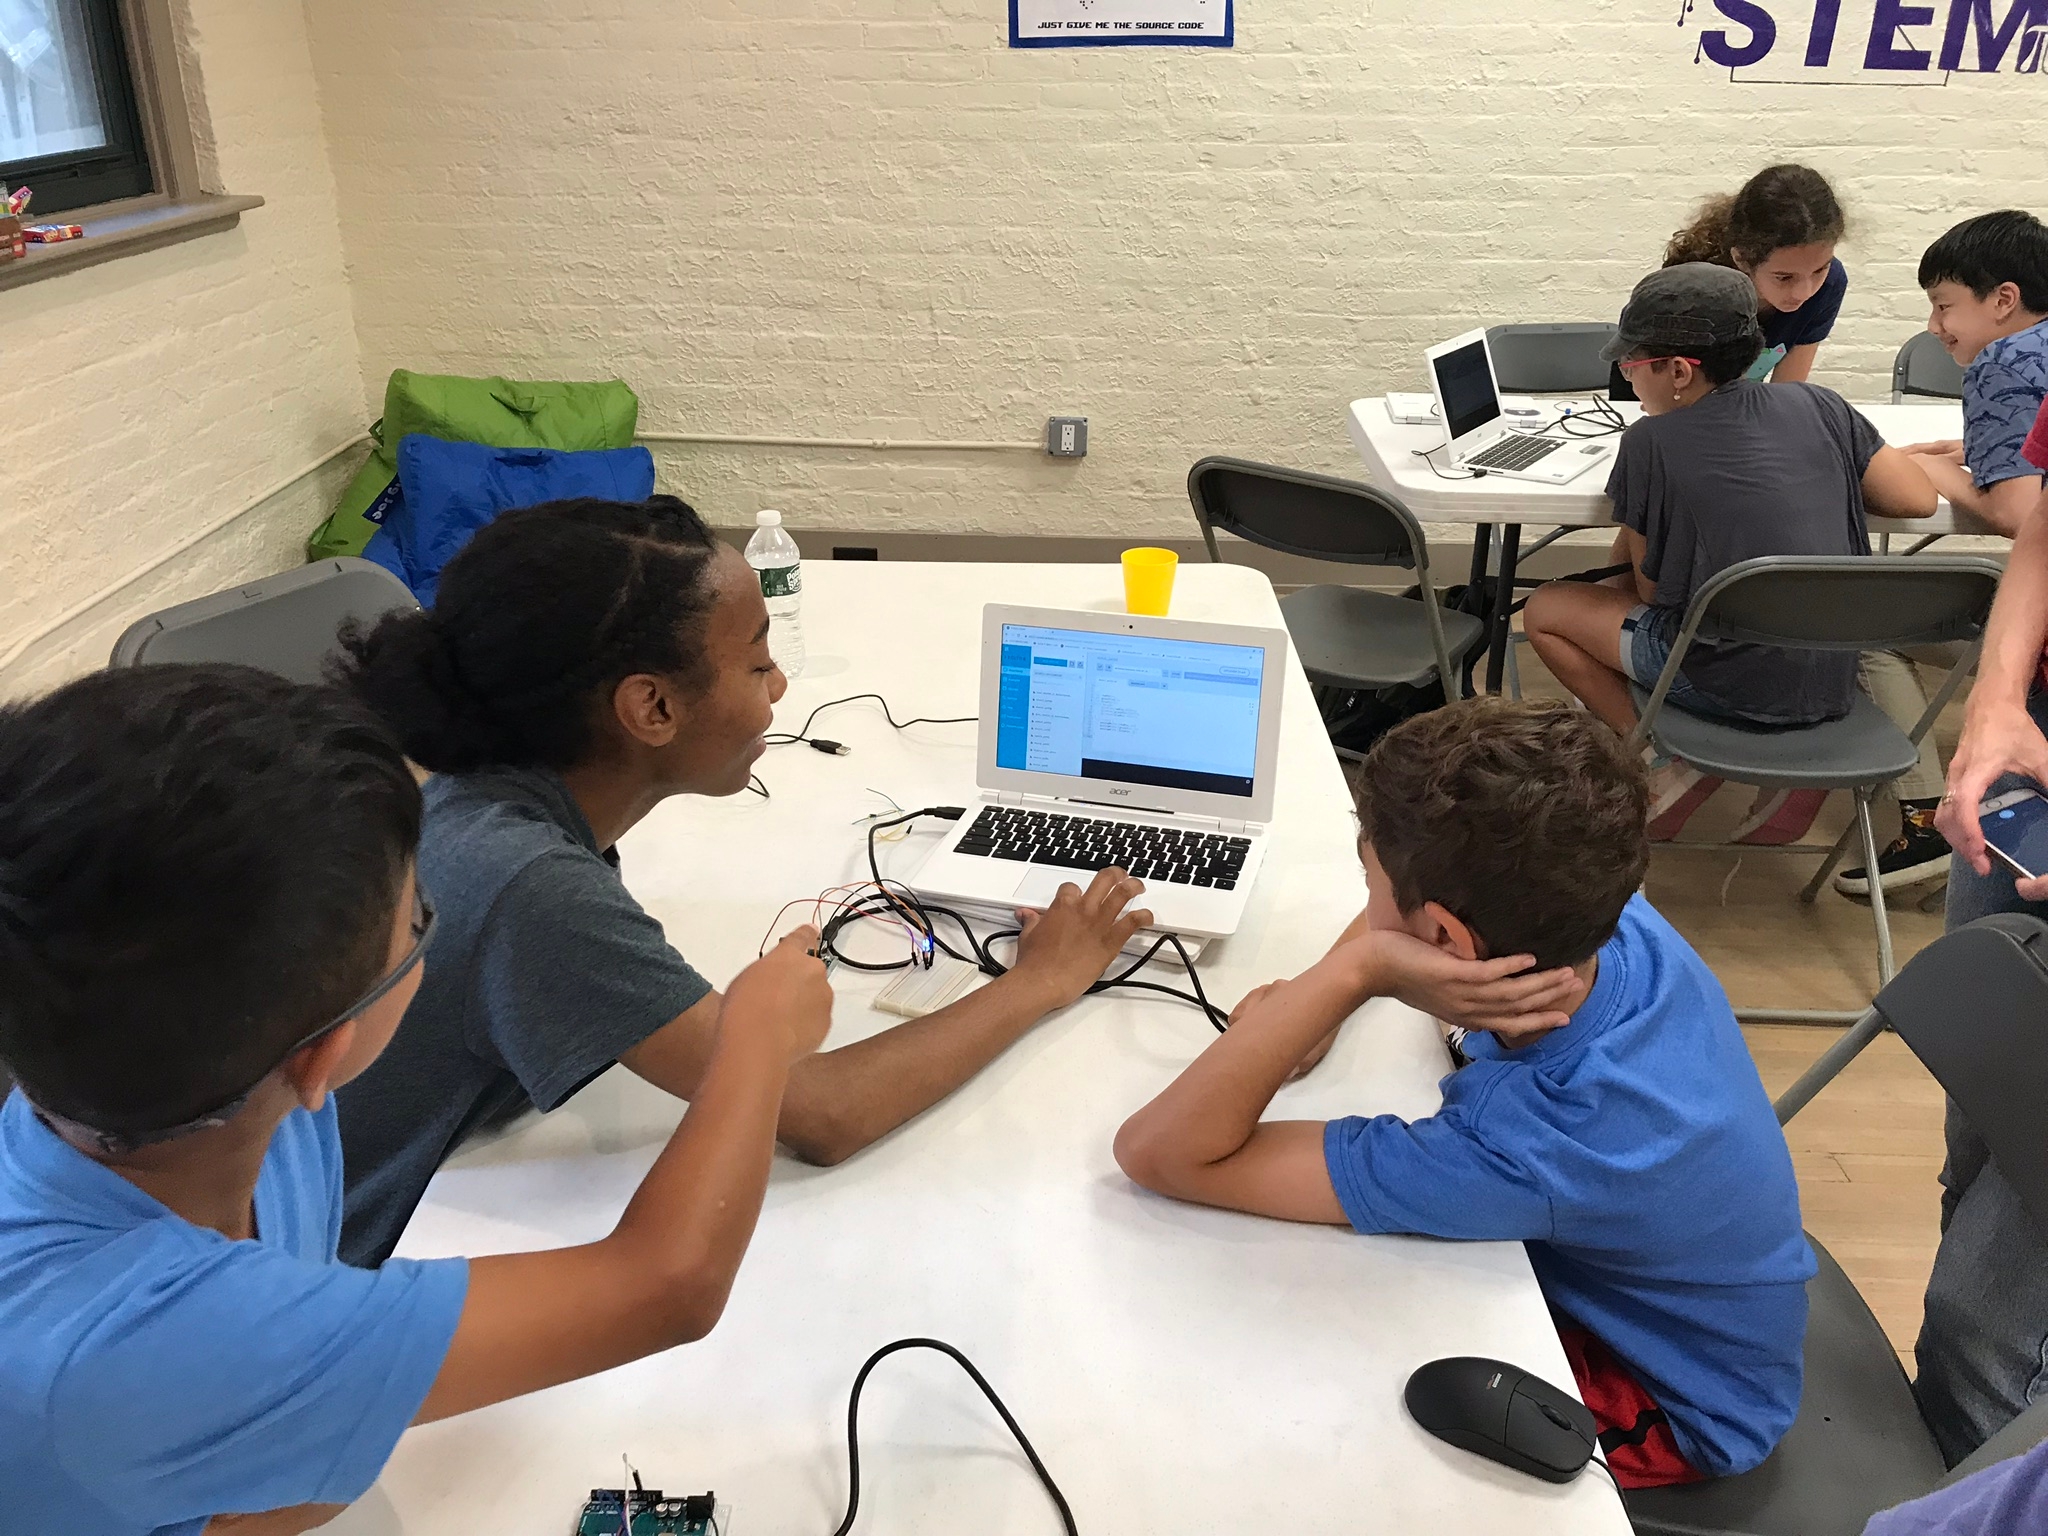 Scratch Jr. Coding Club - Advanced | Small Online Class for Ages 6-8